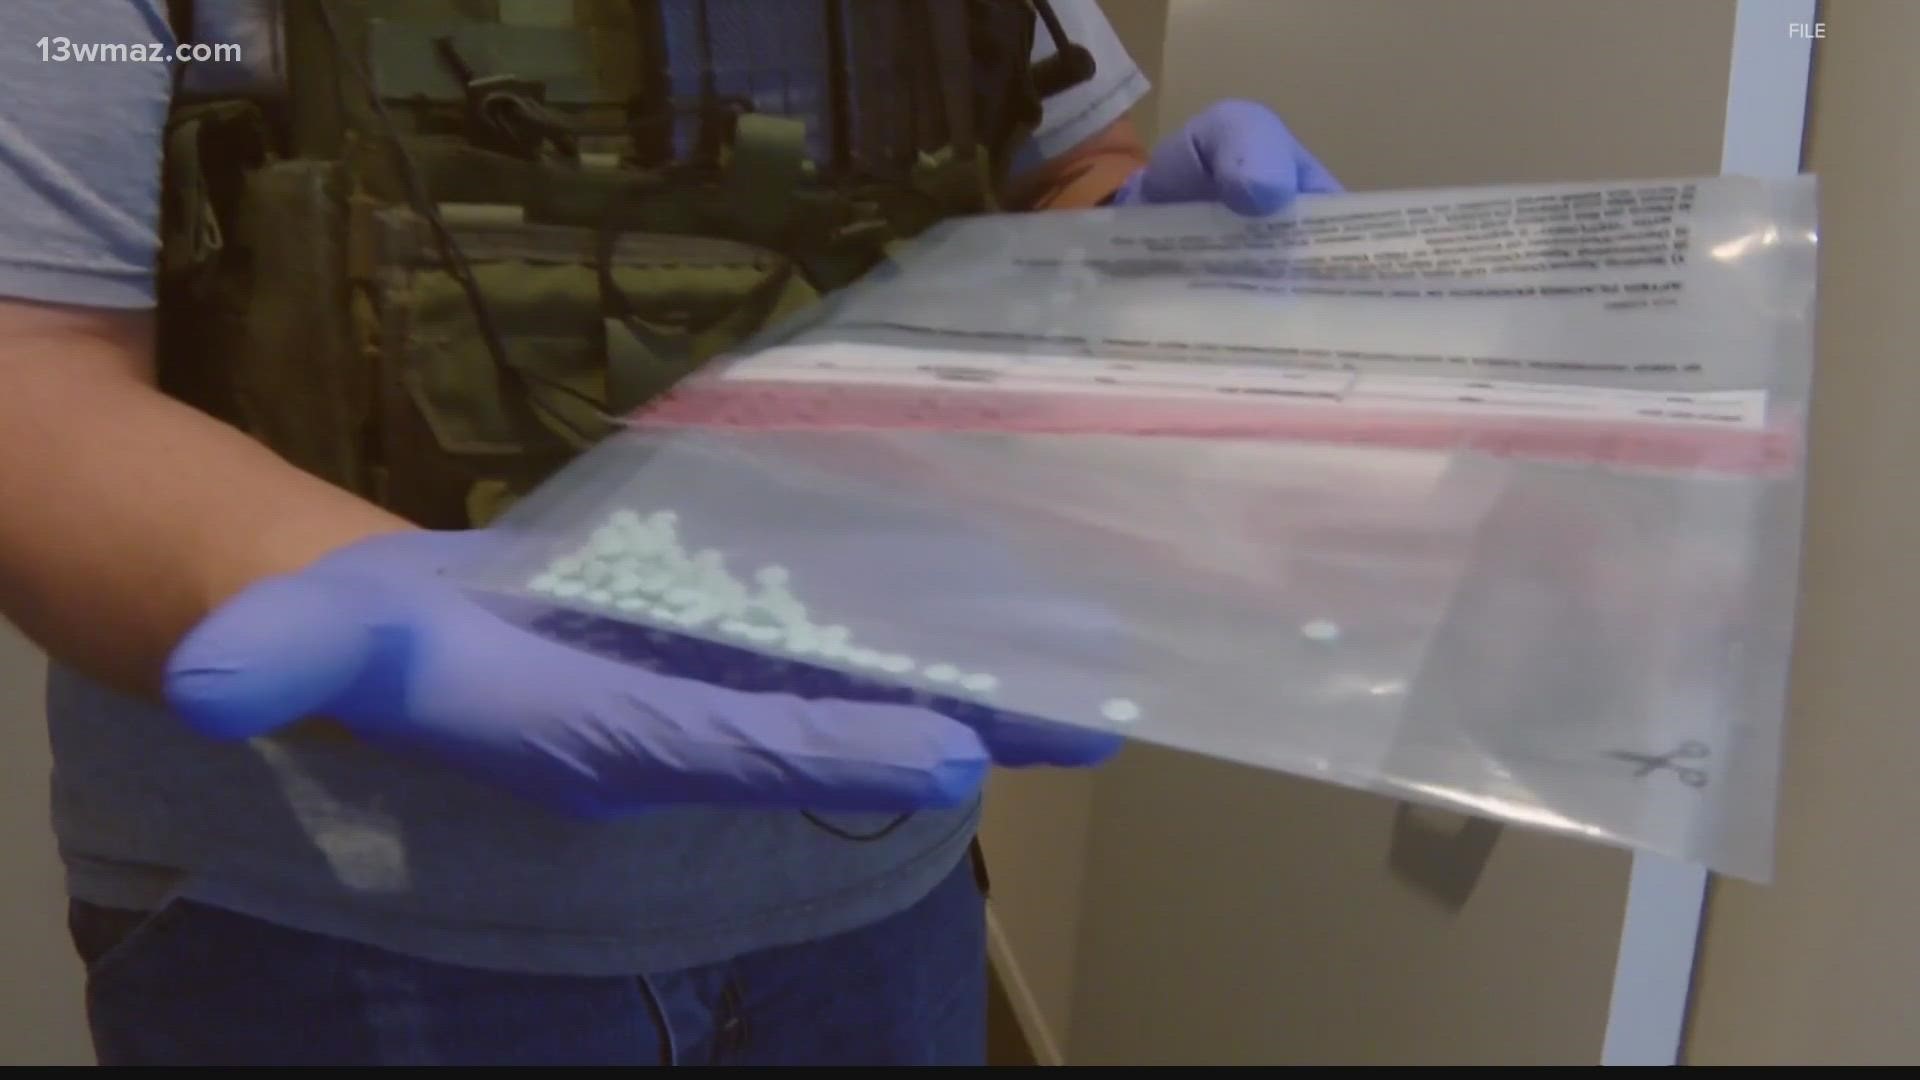 Bibb County Coroner Leon Jones reports there have already been 6 overdose-related deaths this year, but Bibb isn't the only county seeing an upward trend.